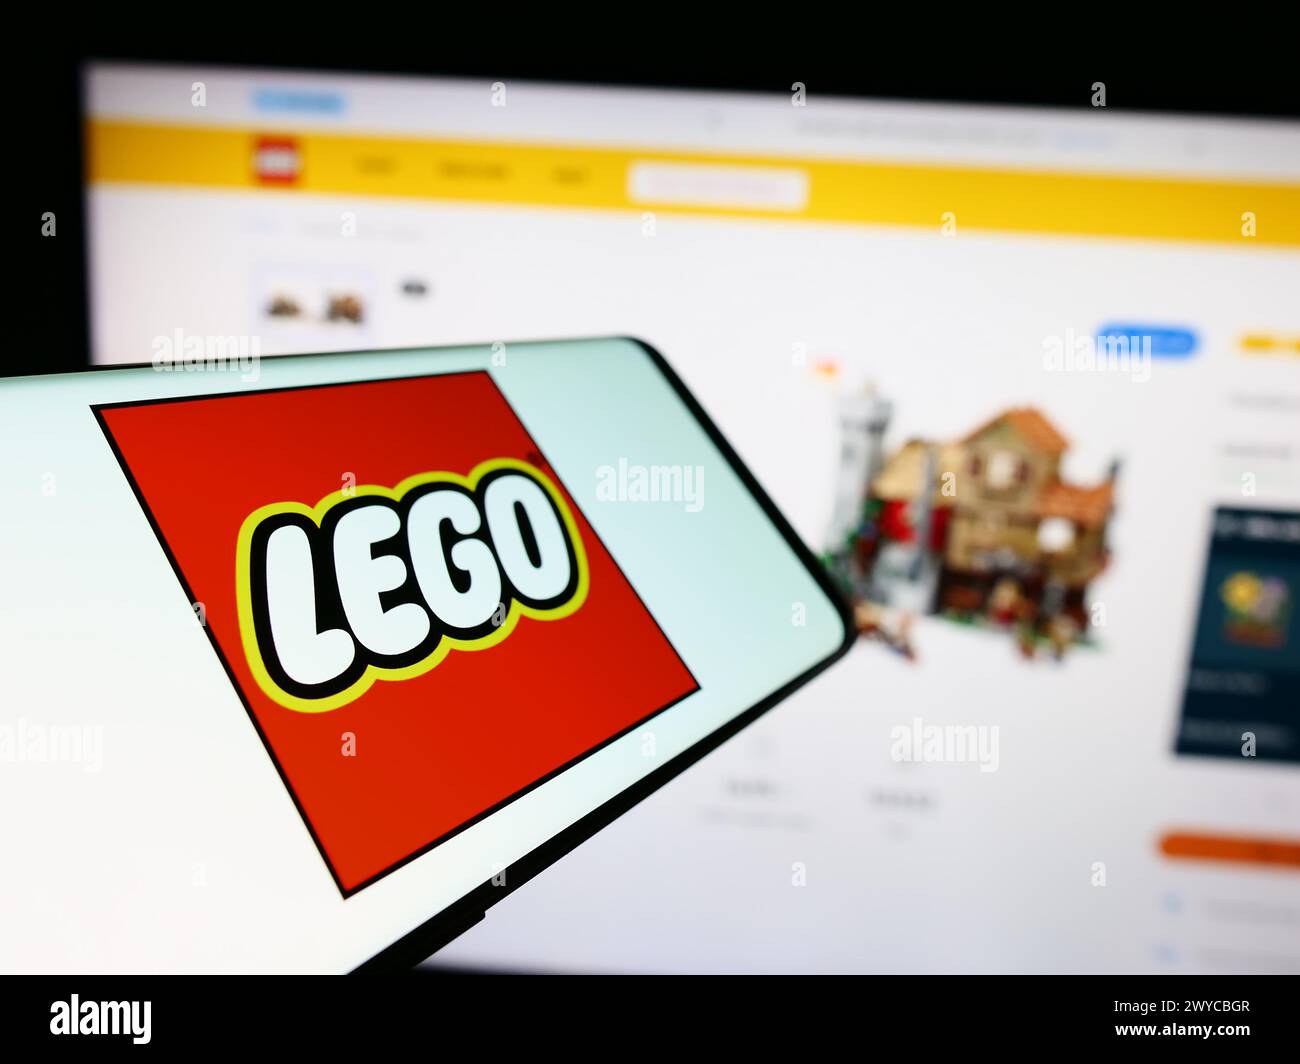 Mobile phone with logo of Danish construction toy company LEGO AS in front of business website. Focus on center-left of phone display. Stock Photo